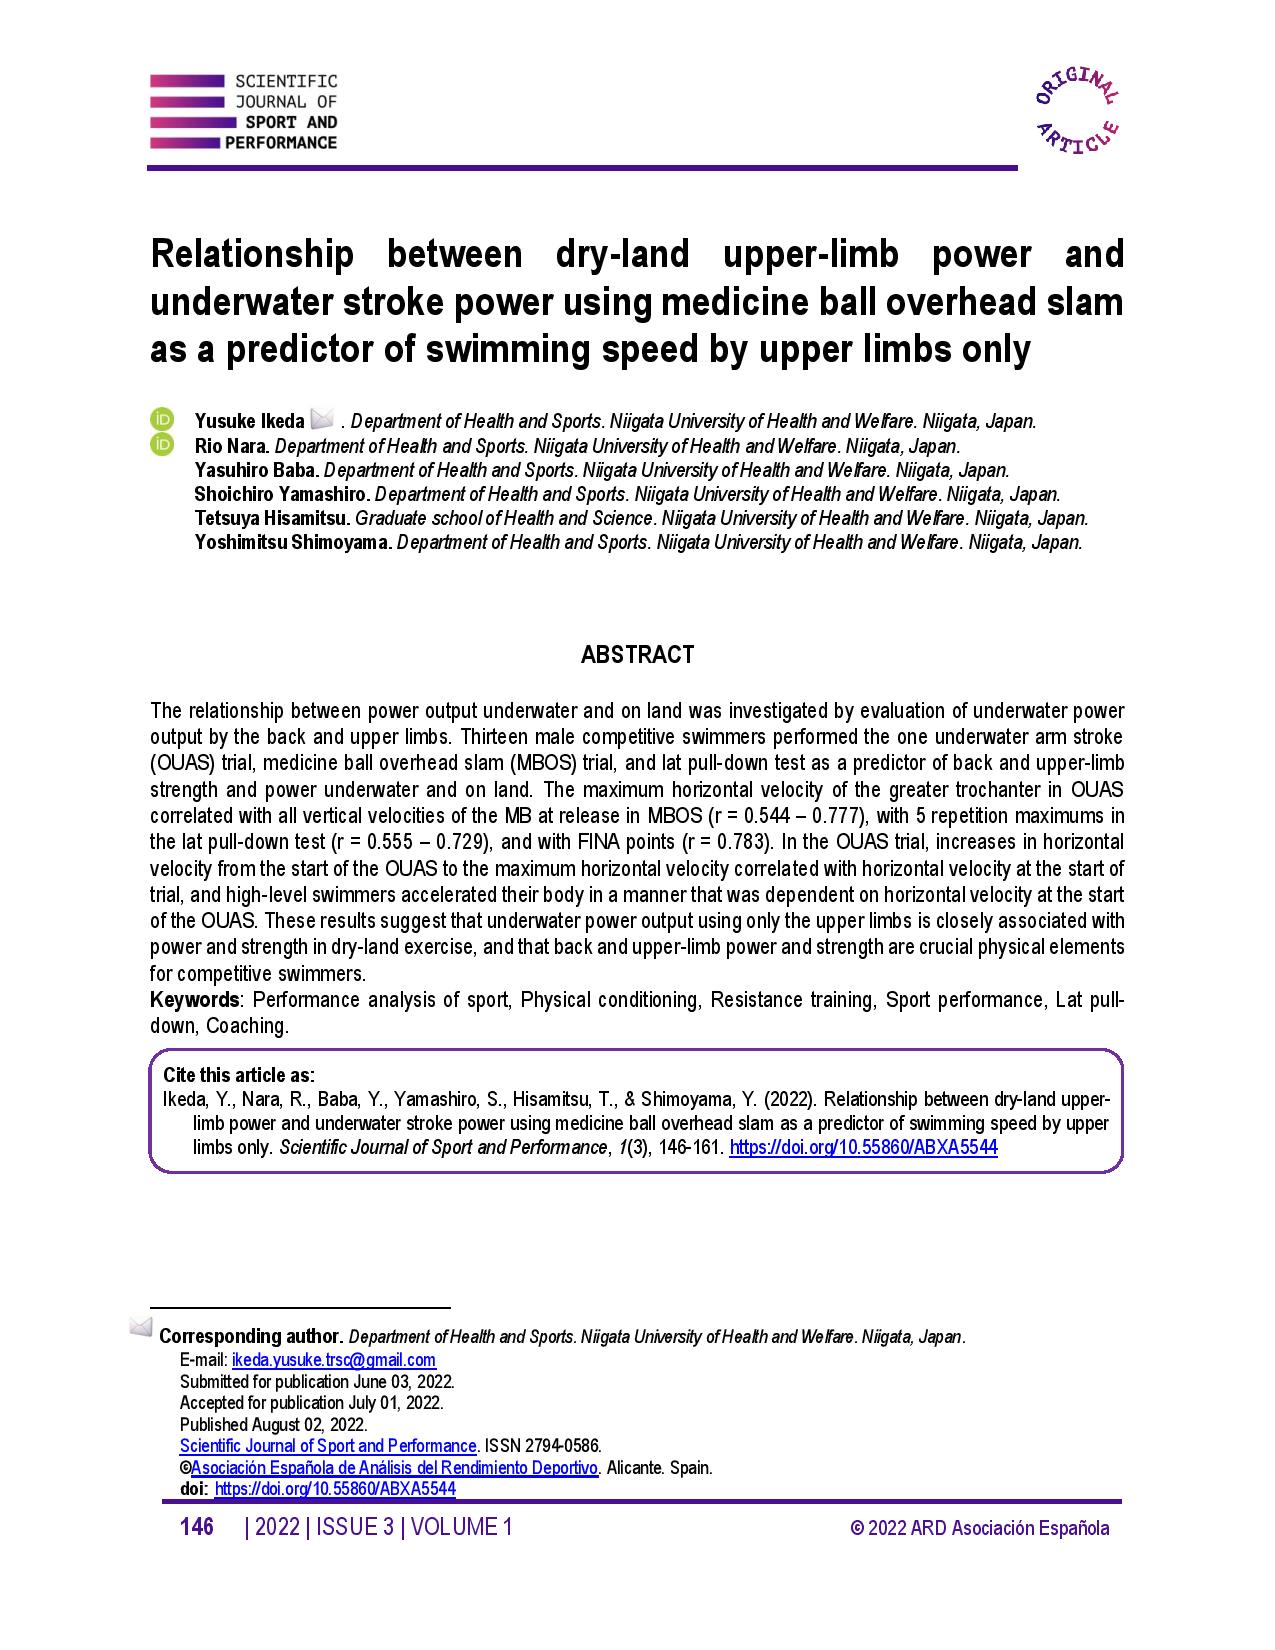 Relationship between dry-land upper-limb power and underwater stroke power using medicine ball overhead slam as a predictor of swimming speed by upper limbs only